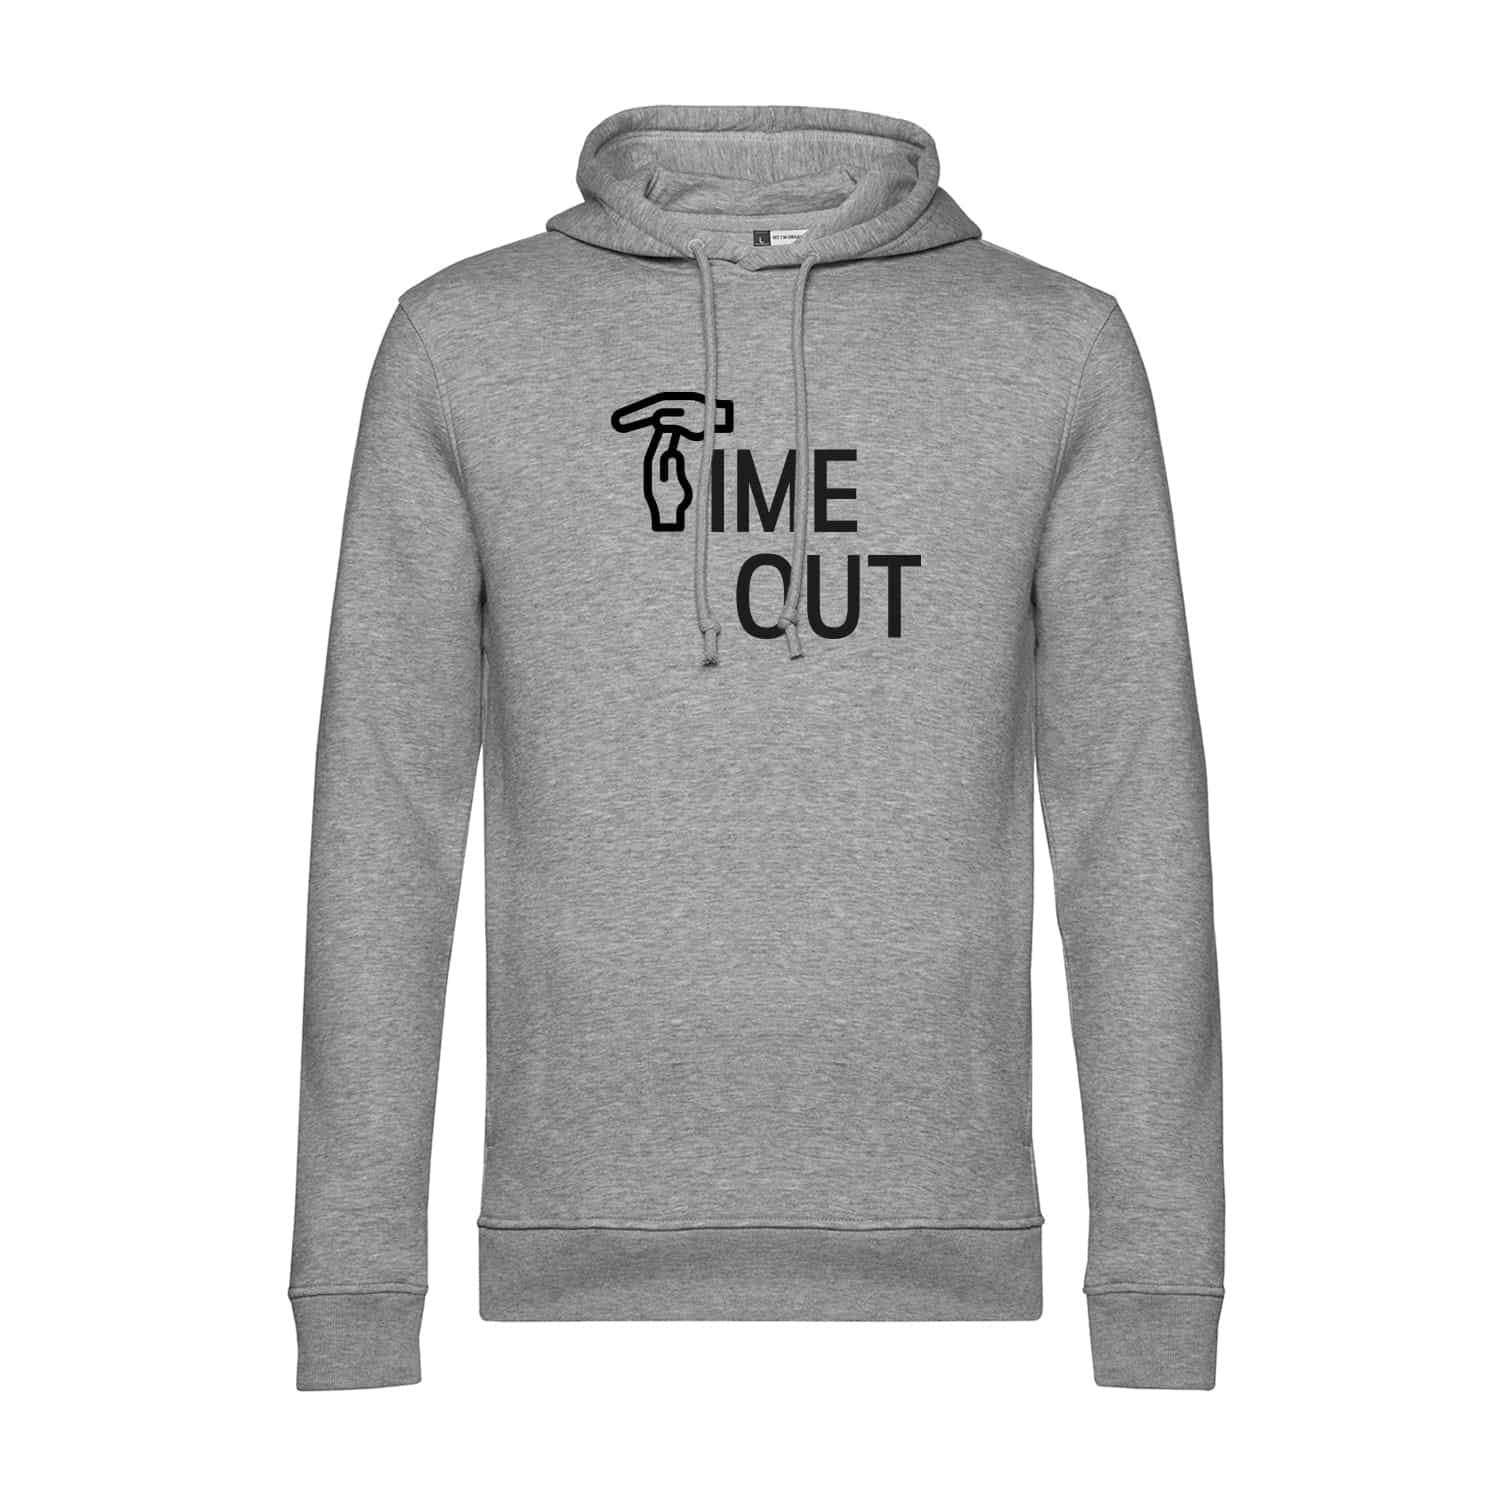 Classic Hoodie "Time Out"